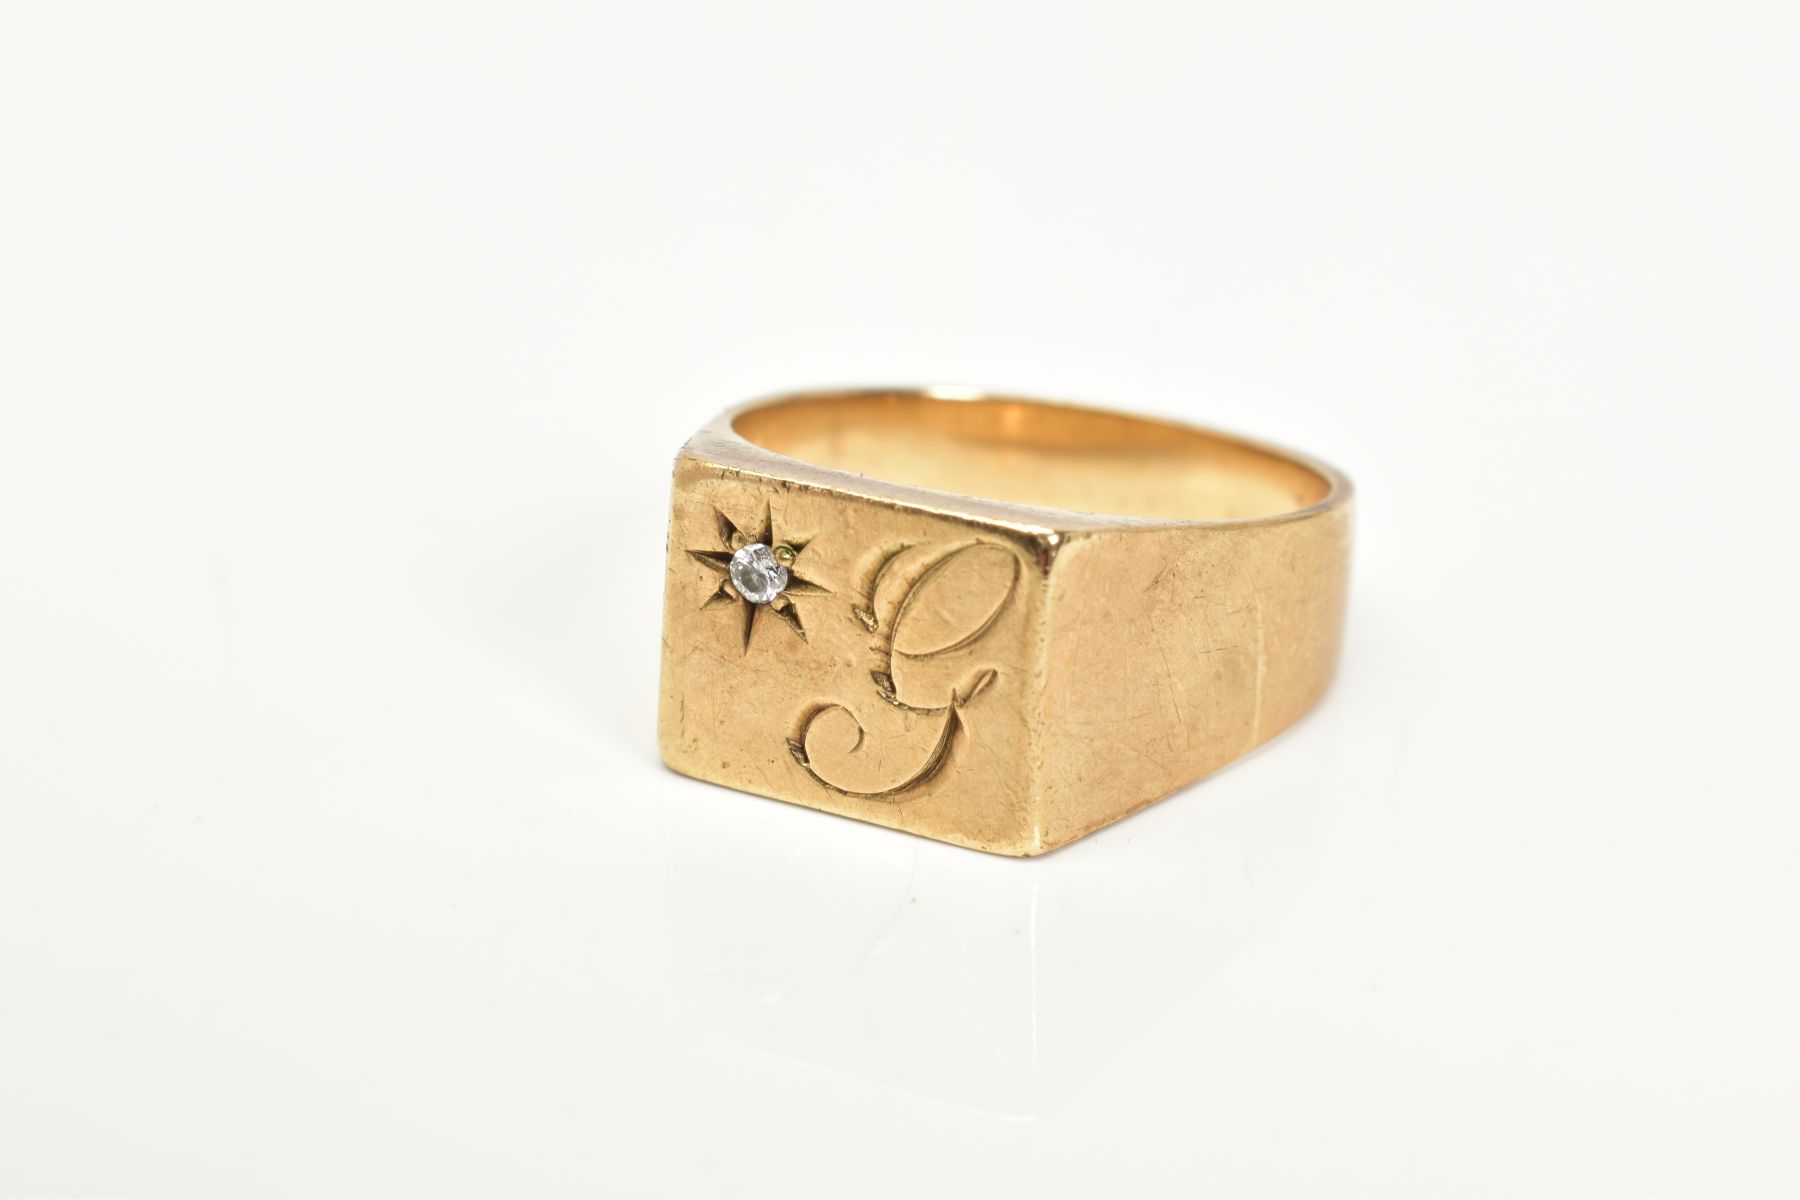 A GENTLEMANS 9CT GOLD SIGNET RING, designed with a square with engraved initial, set with a single